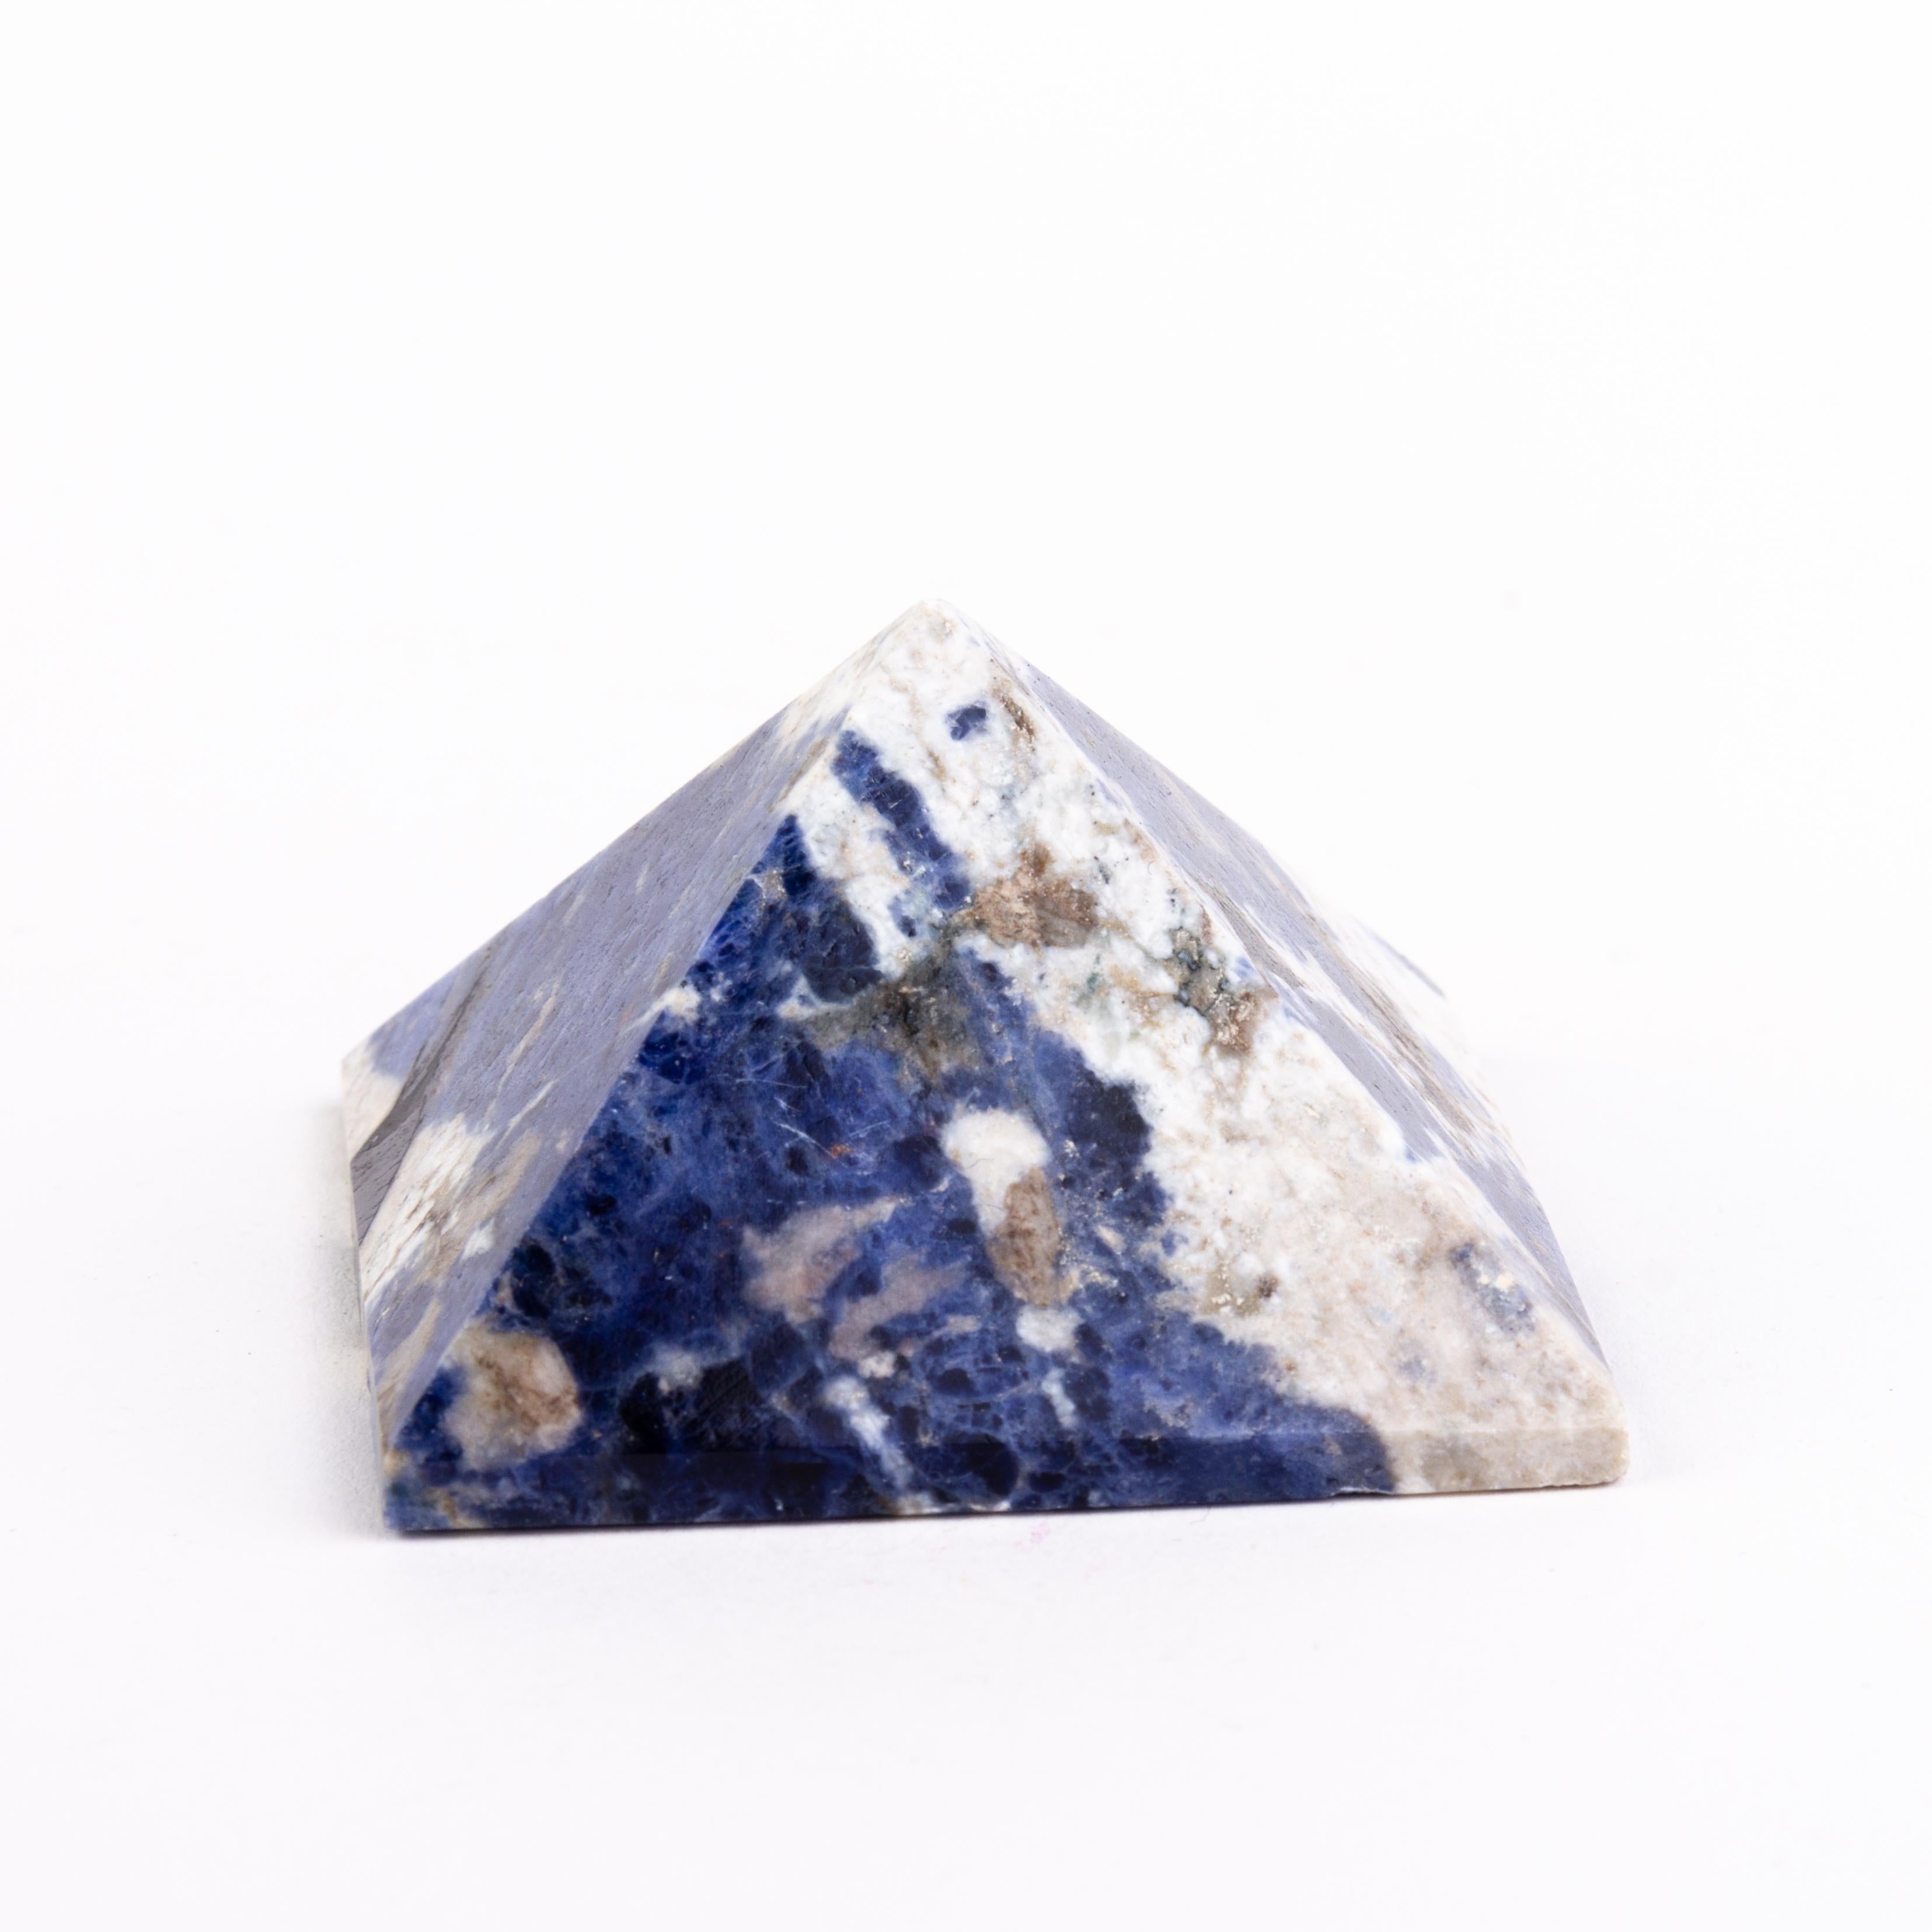 In good condition
From a private collection
Free international shipping
Grand Tour Lapis Specimen Pyramid Desk Paperweight 